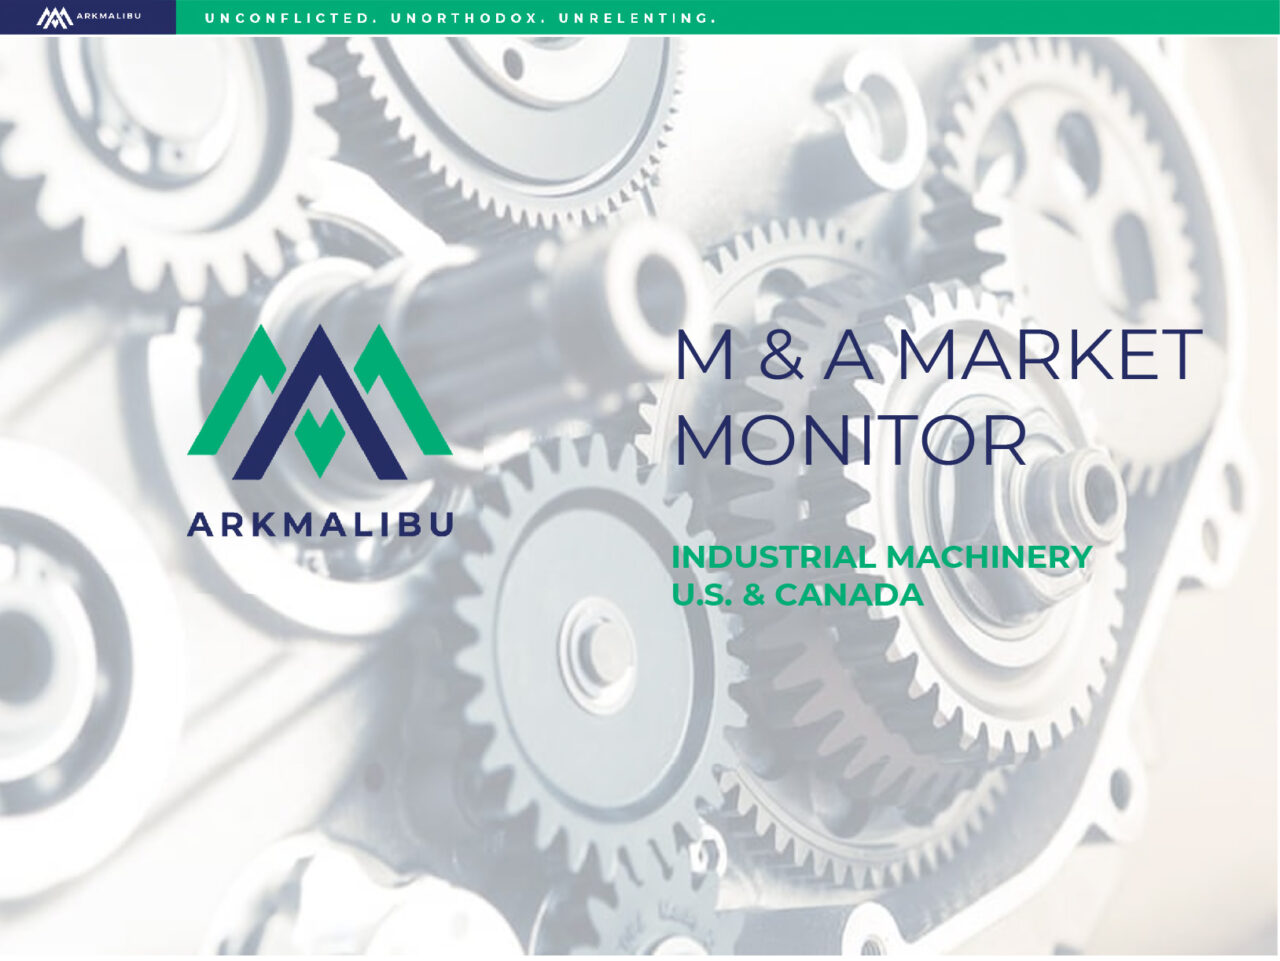 Market Monitor Cover for Industrial Machinery. Faded Image of a gears in the background